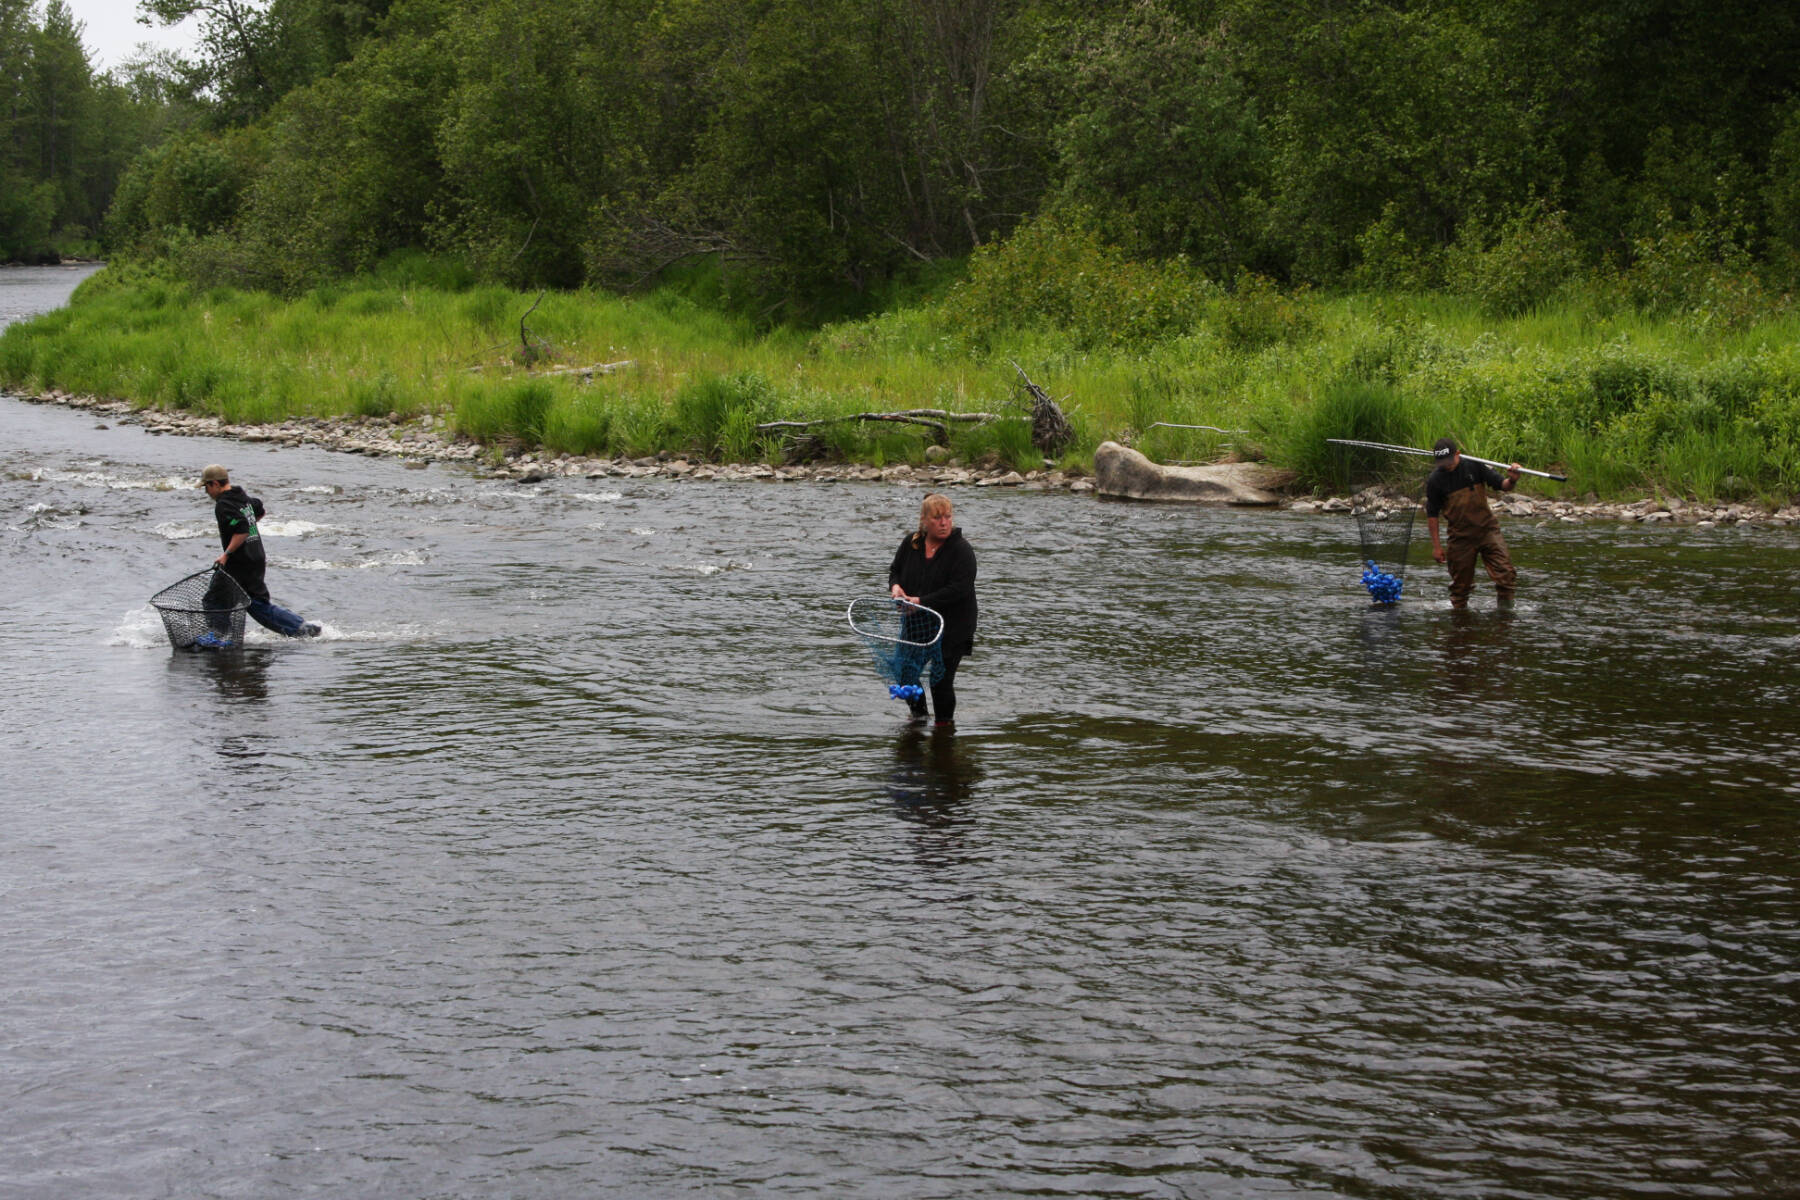 Event volunteers wade through the Anchor River to snag ducks as they cross the finish line during the Fourth of July Duck Race on Sunday, July 2, 2023 in Anchor Point, Alaska. (Delcenia Cosman/Homer News)